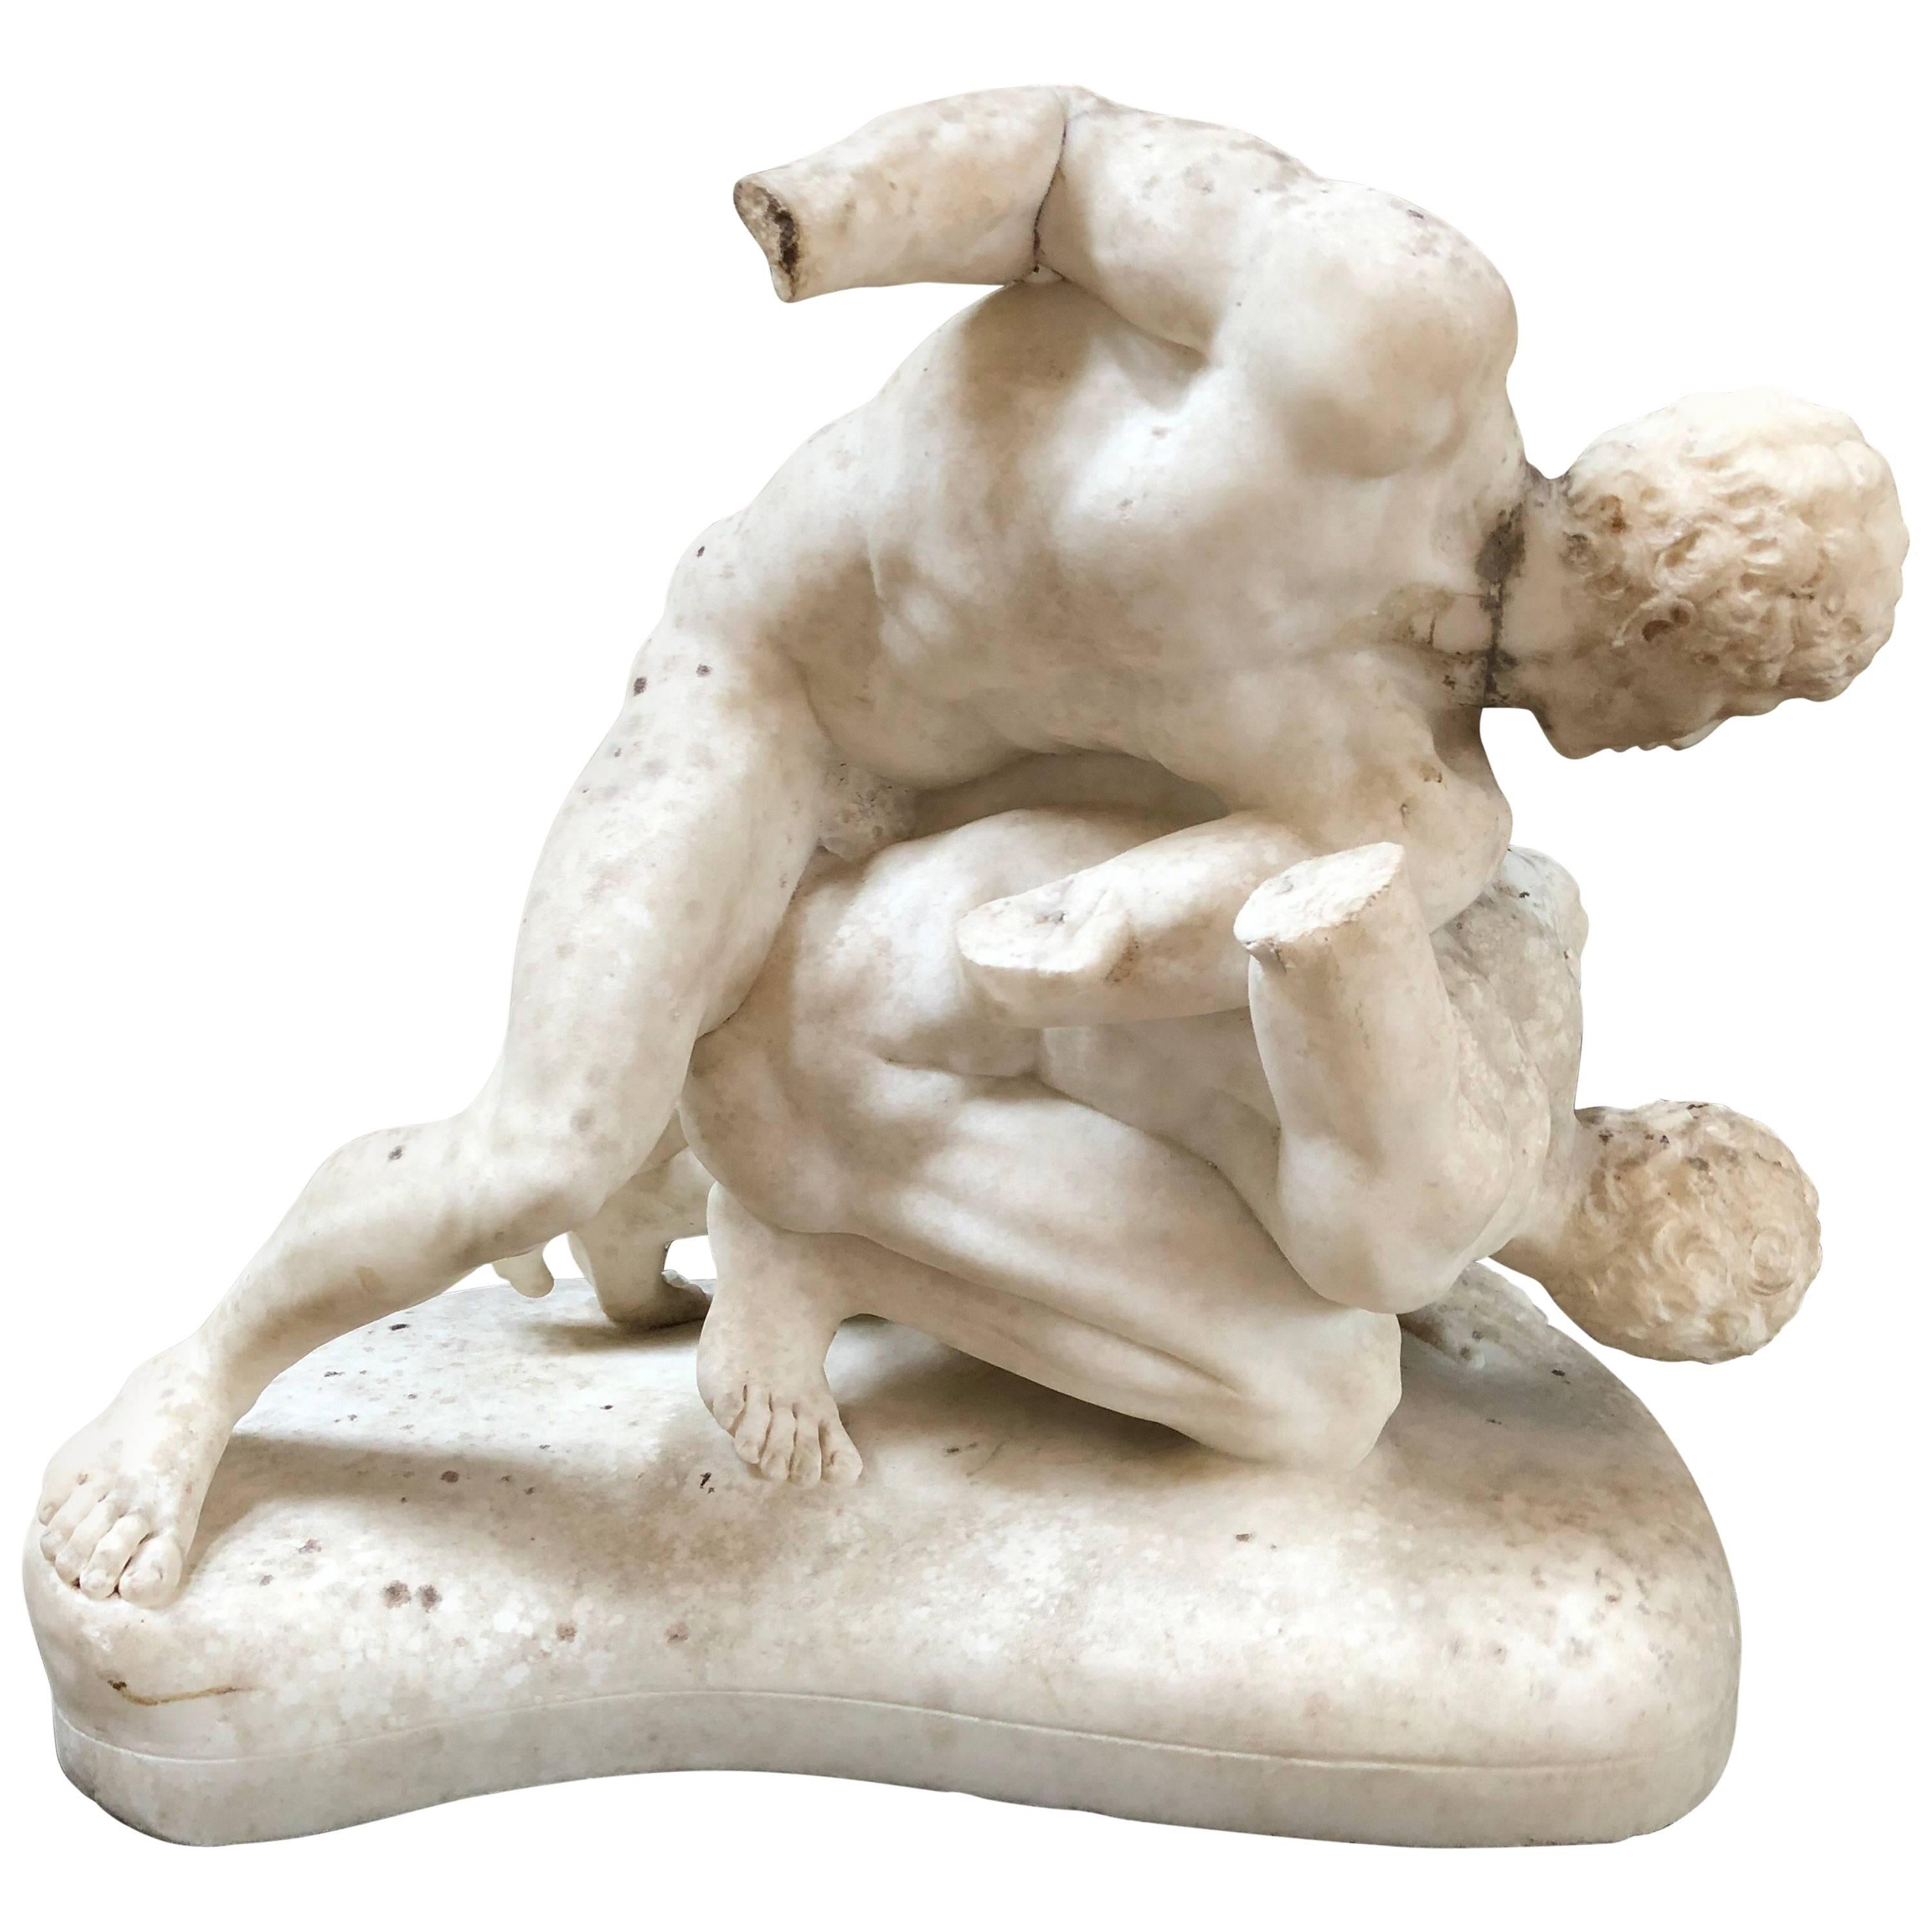 19th Century Carved Marble Sculpture of the Uffizi Wrestlers